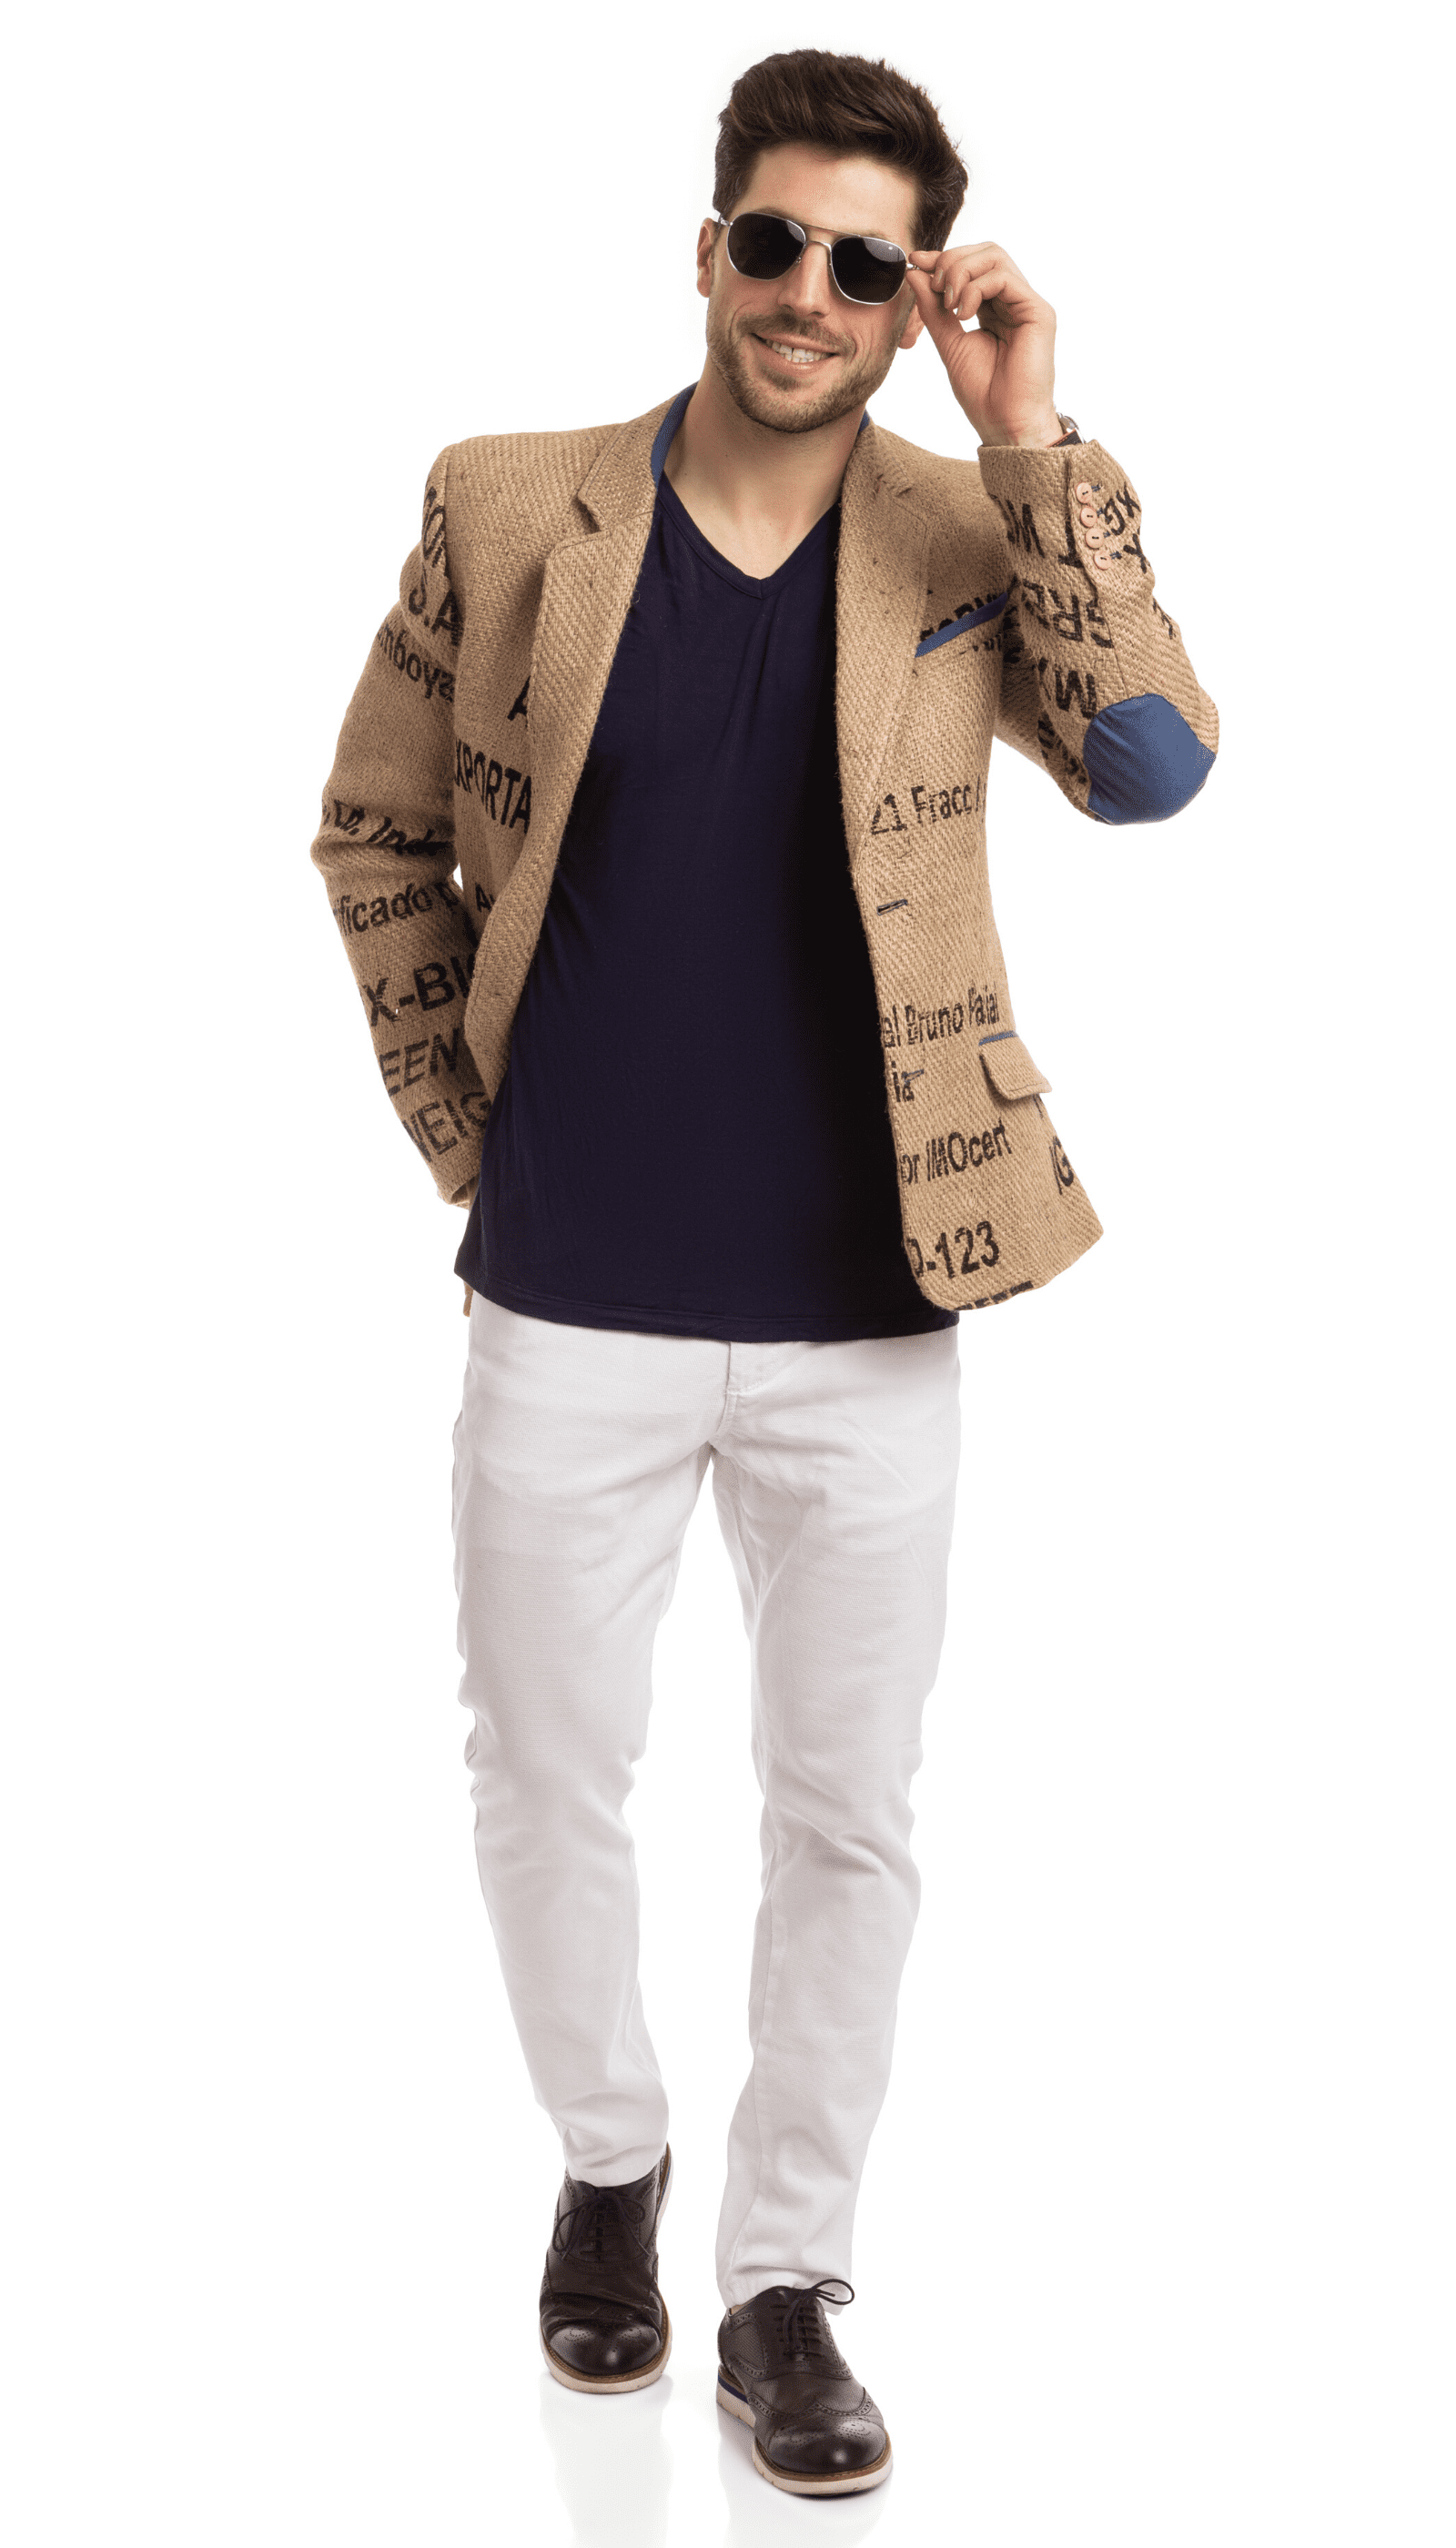 Memorable design of an eco-friendly sports jacket from THE COFFEE JACKET® made of upcycled coffee sacks